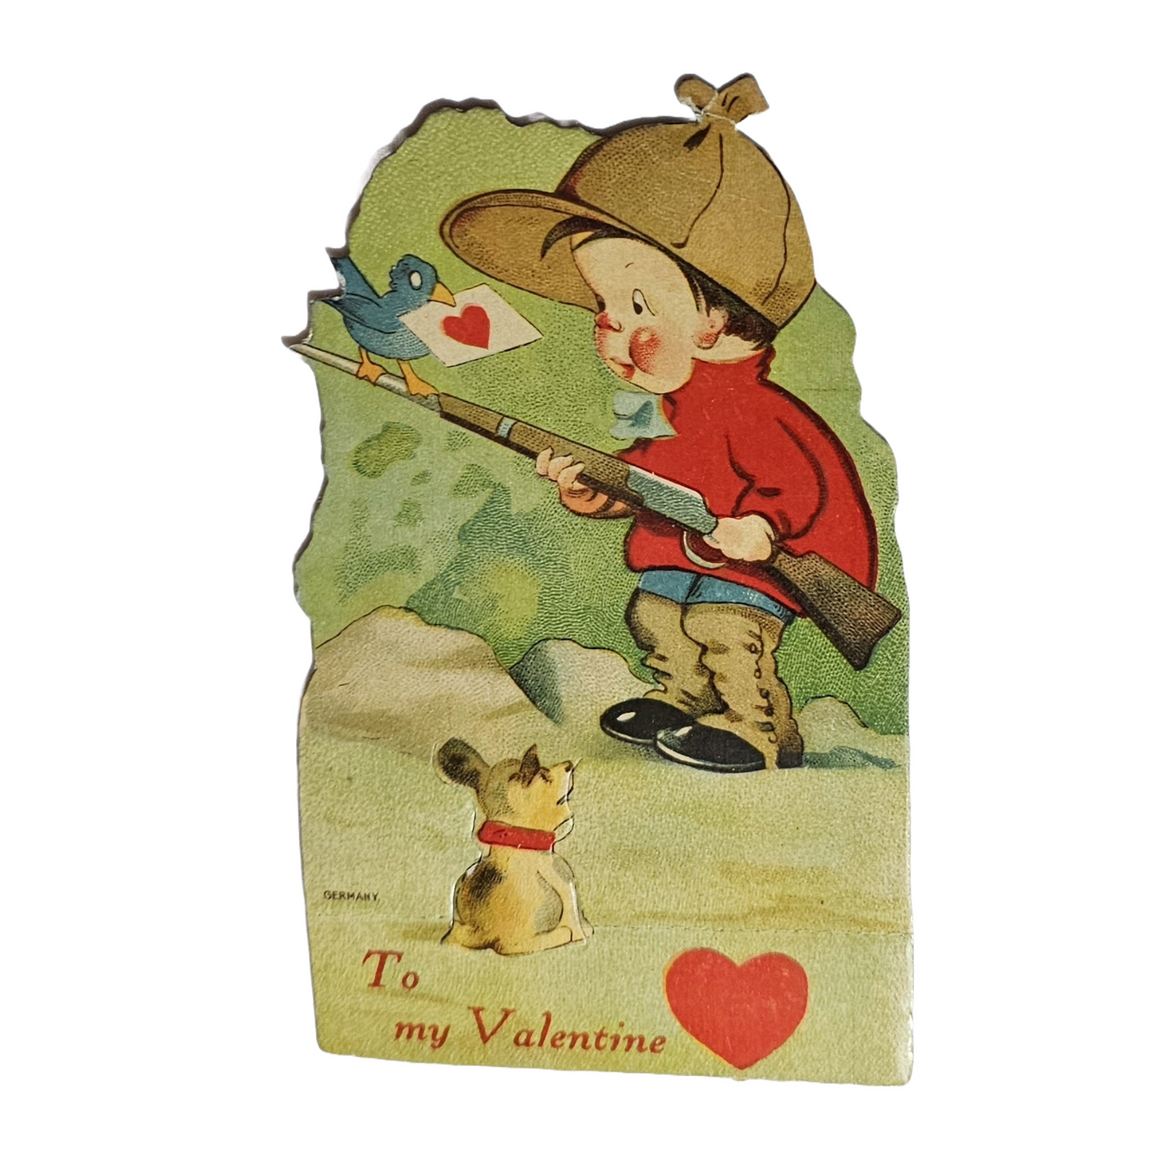 Vintage Die Cut Valentine Card Boy Hunting with Puppy Dog and Blue Bird Holding Letter